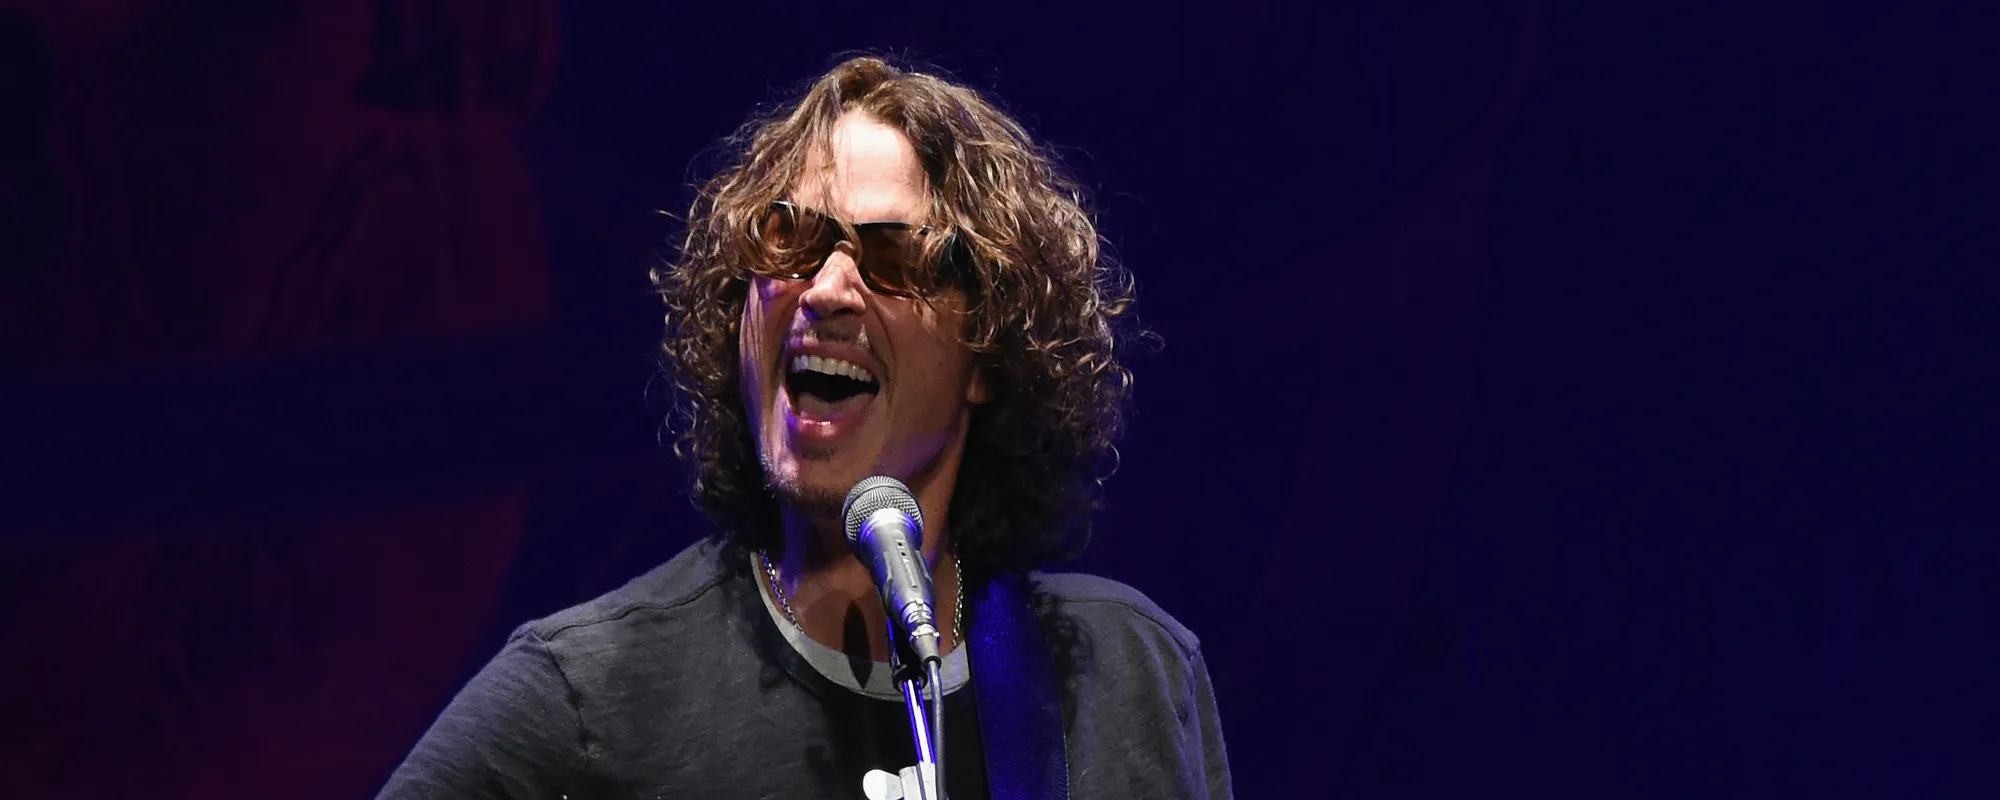 5 Songs You Didn’t Know Chris Cornell Wrote for Other Artists